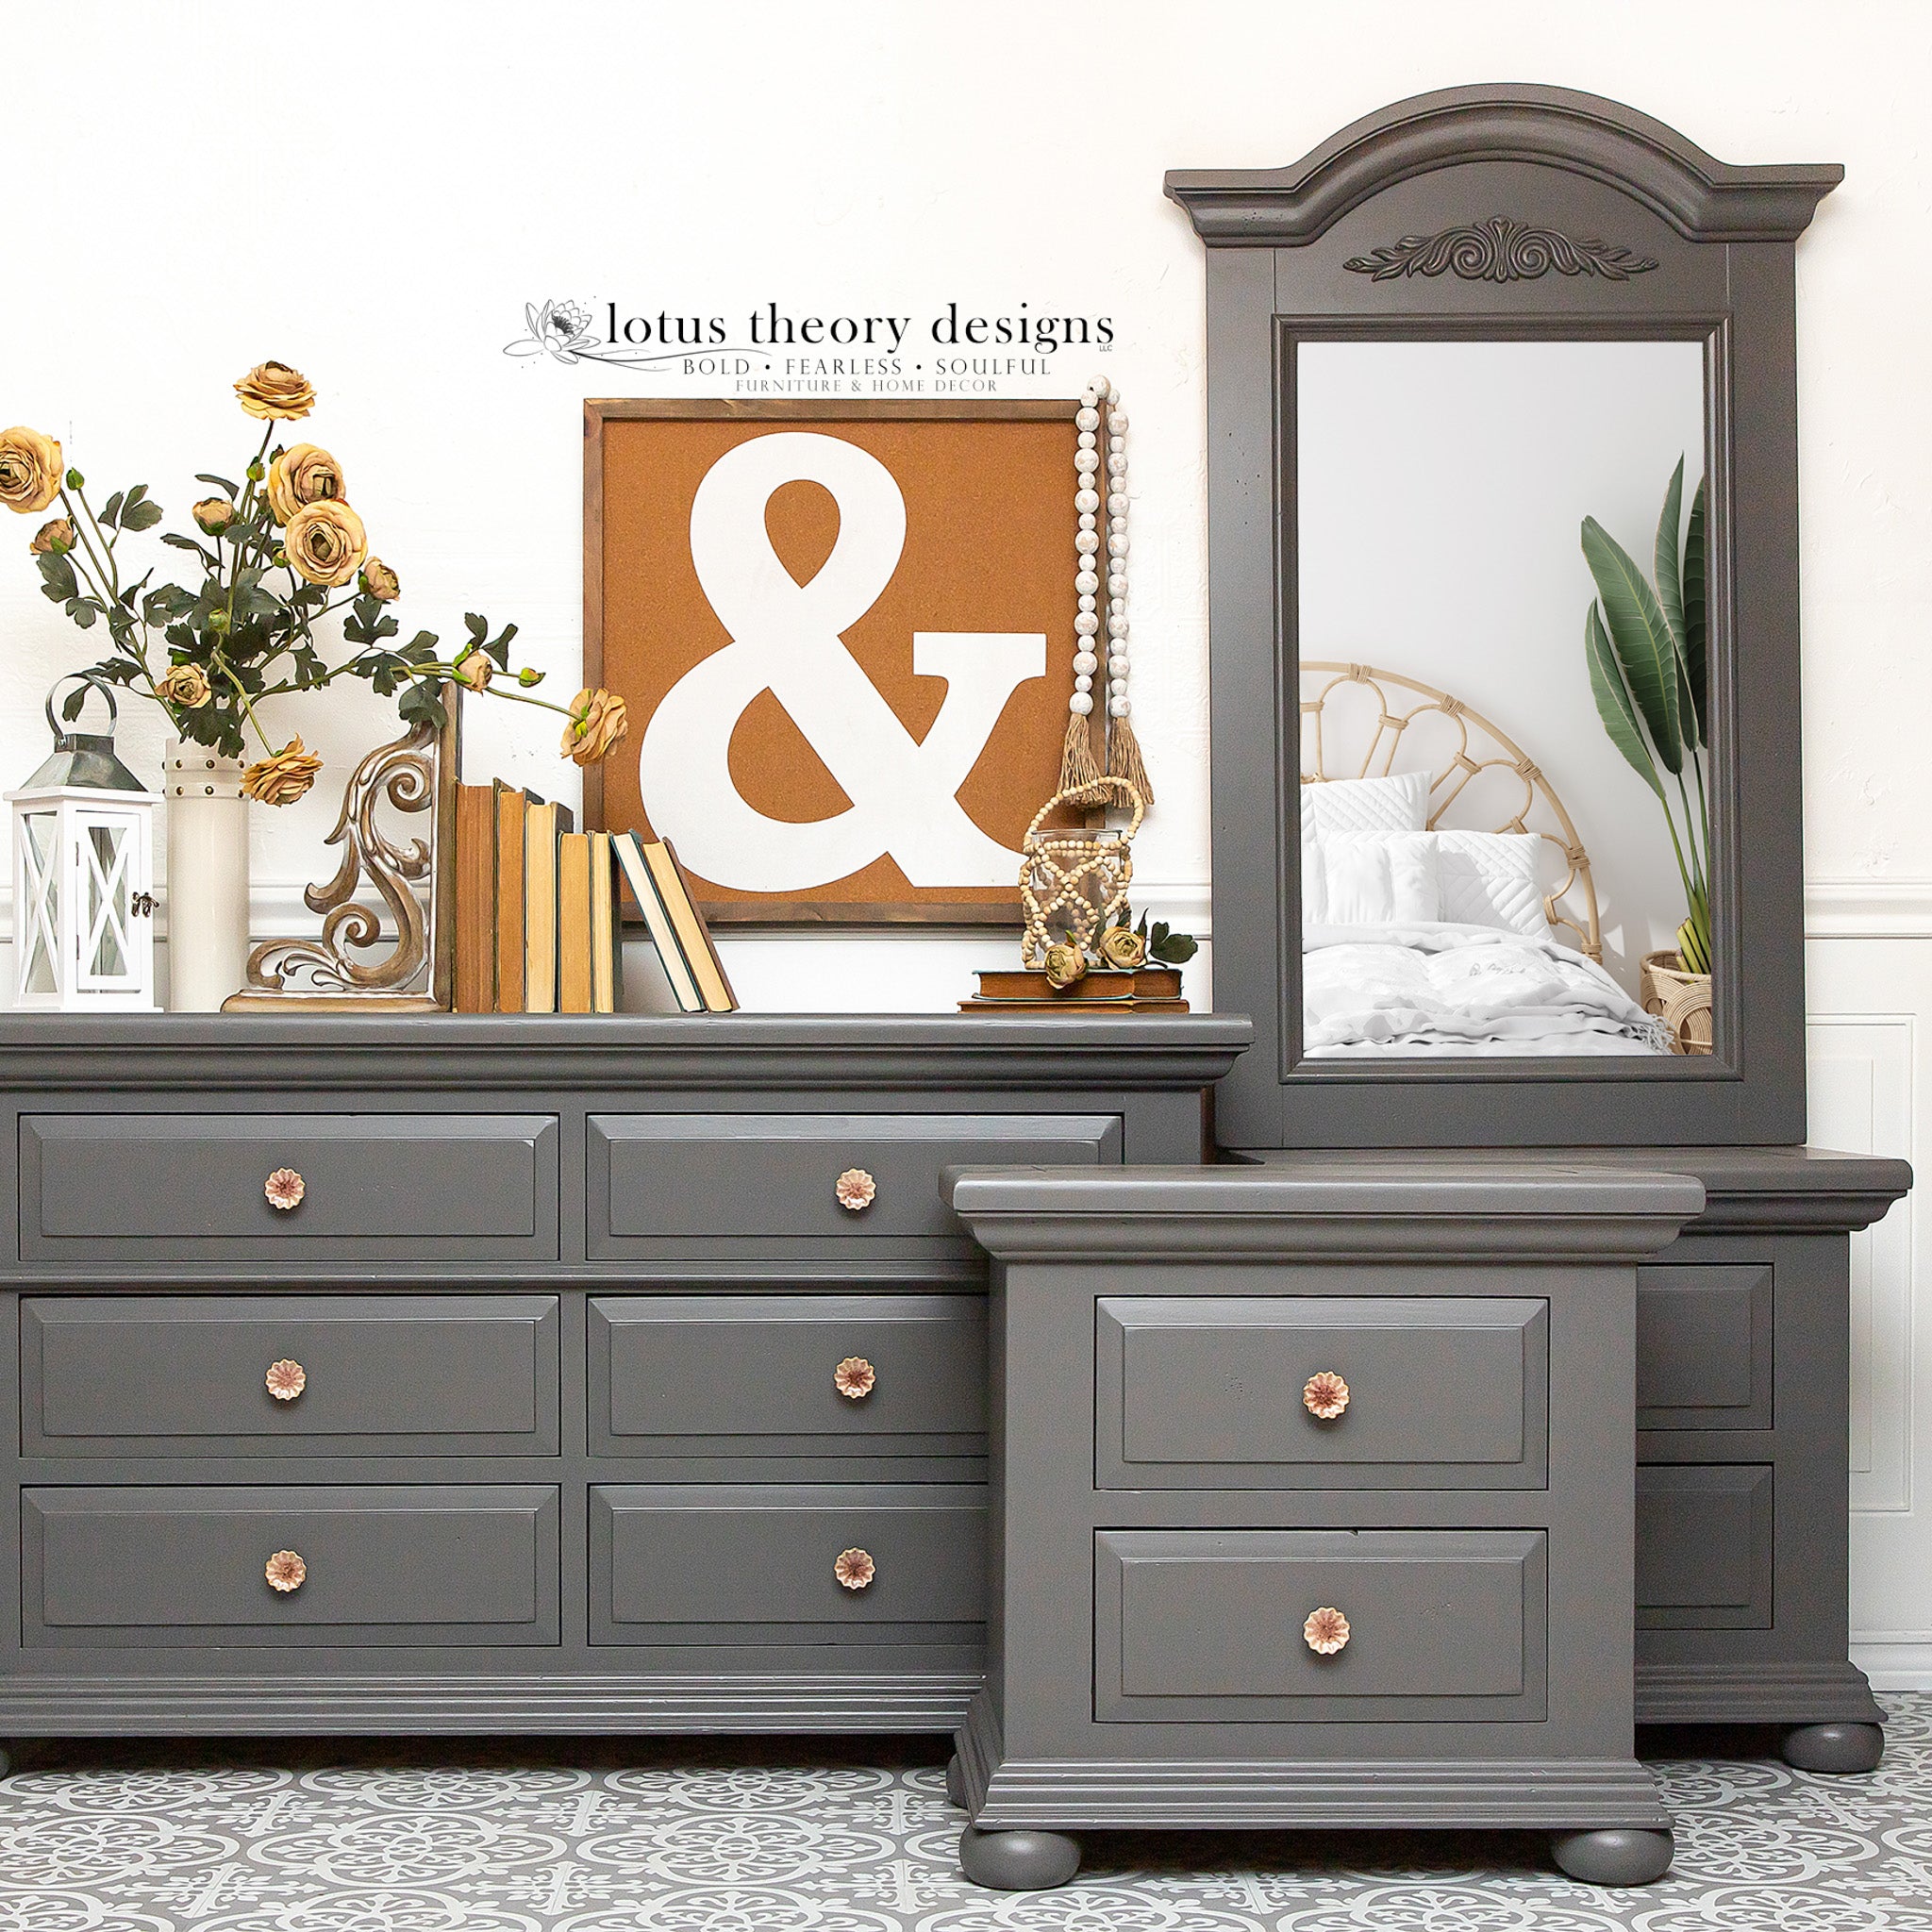 A bedroom furniture set that includes 2 nightstands, a dresser, and a mirror that have been refurbished by Lotus Theory Designs are painted in Dixie Belle's Hurricane Gray chalk mineral paint.